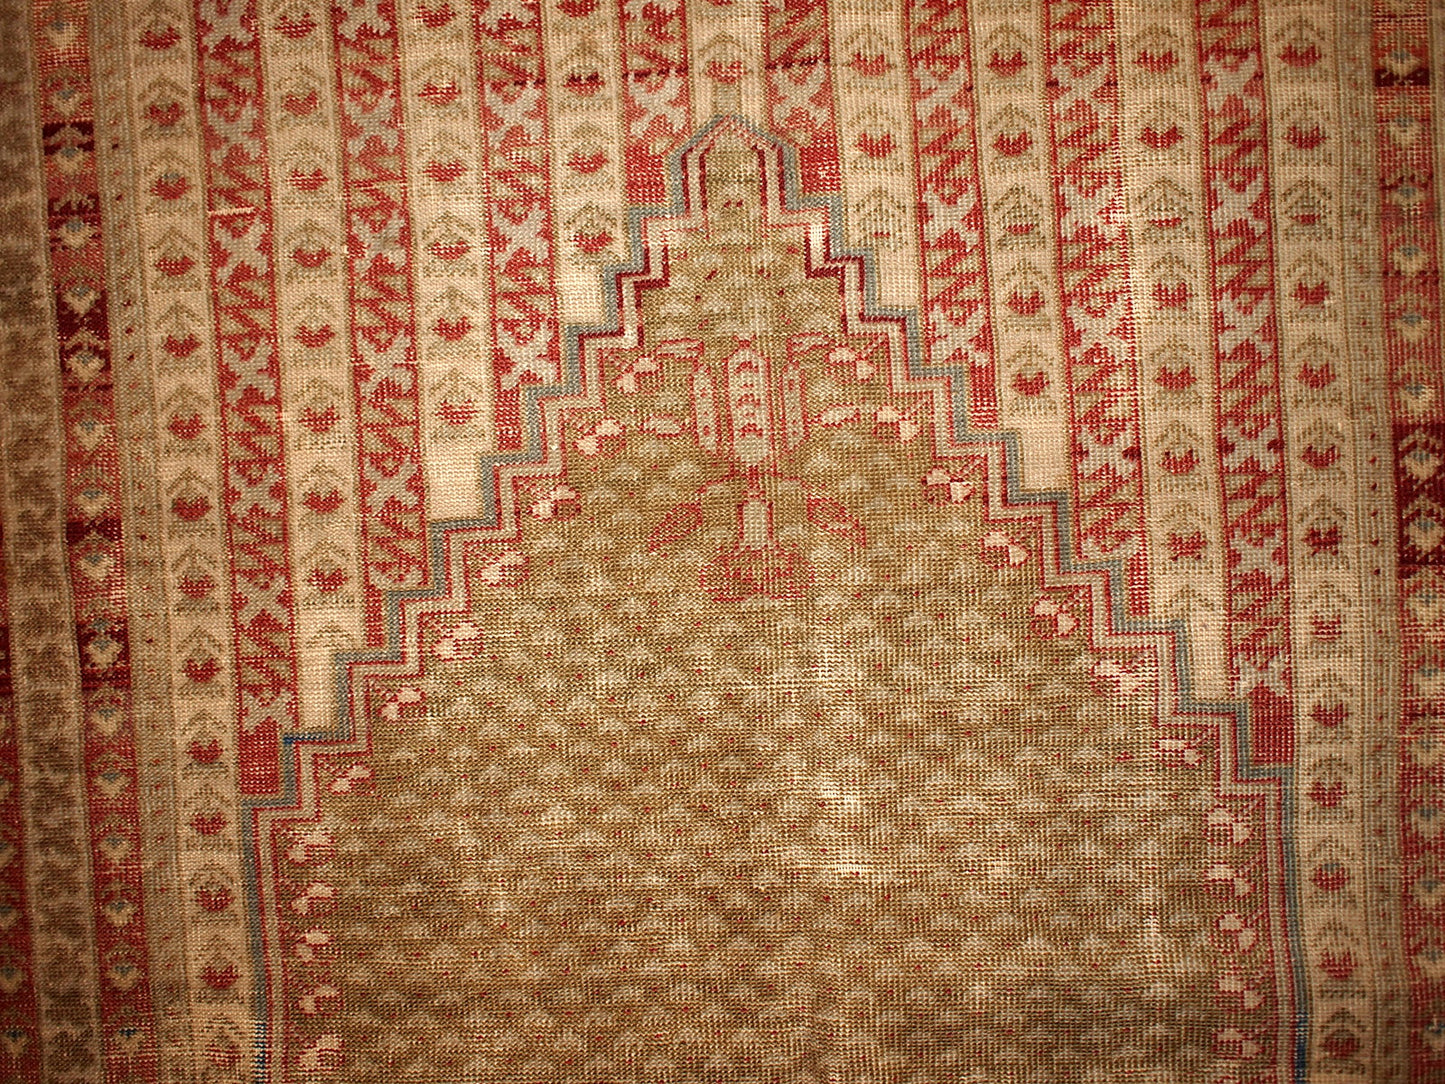 Antique collectible prayer Turkish Ghurdes rug in distressed condition. The rug is in olive green color and lots of narrow borders in burgundy, red and beige shades. 